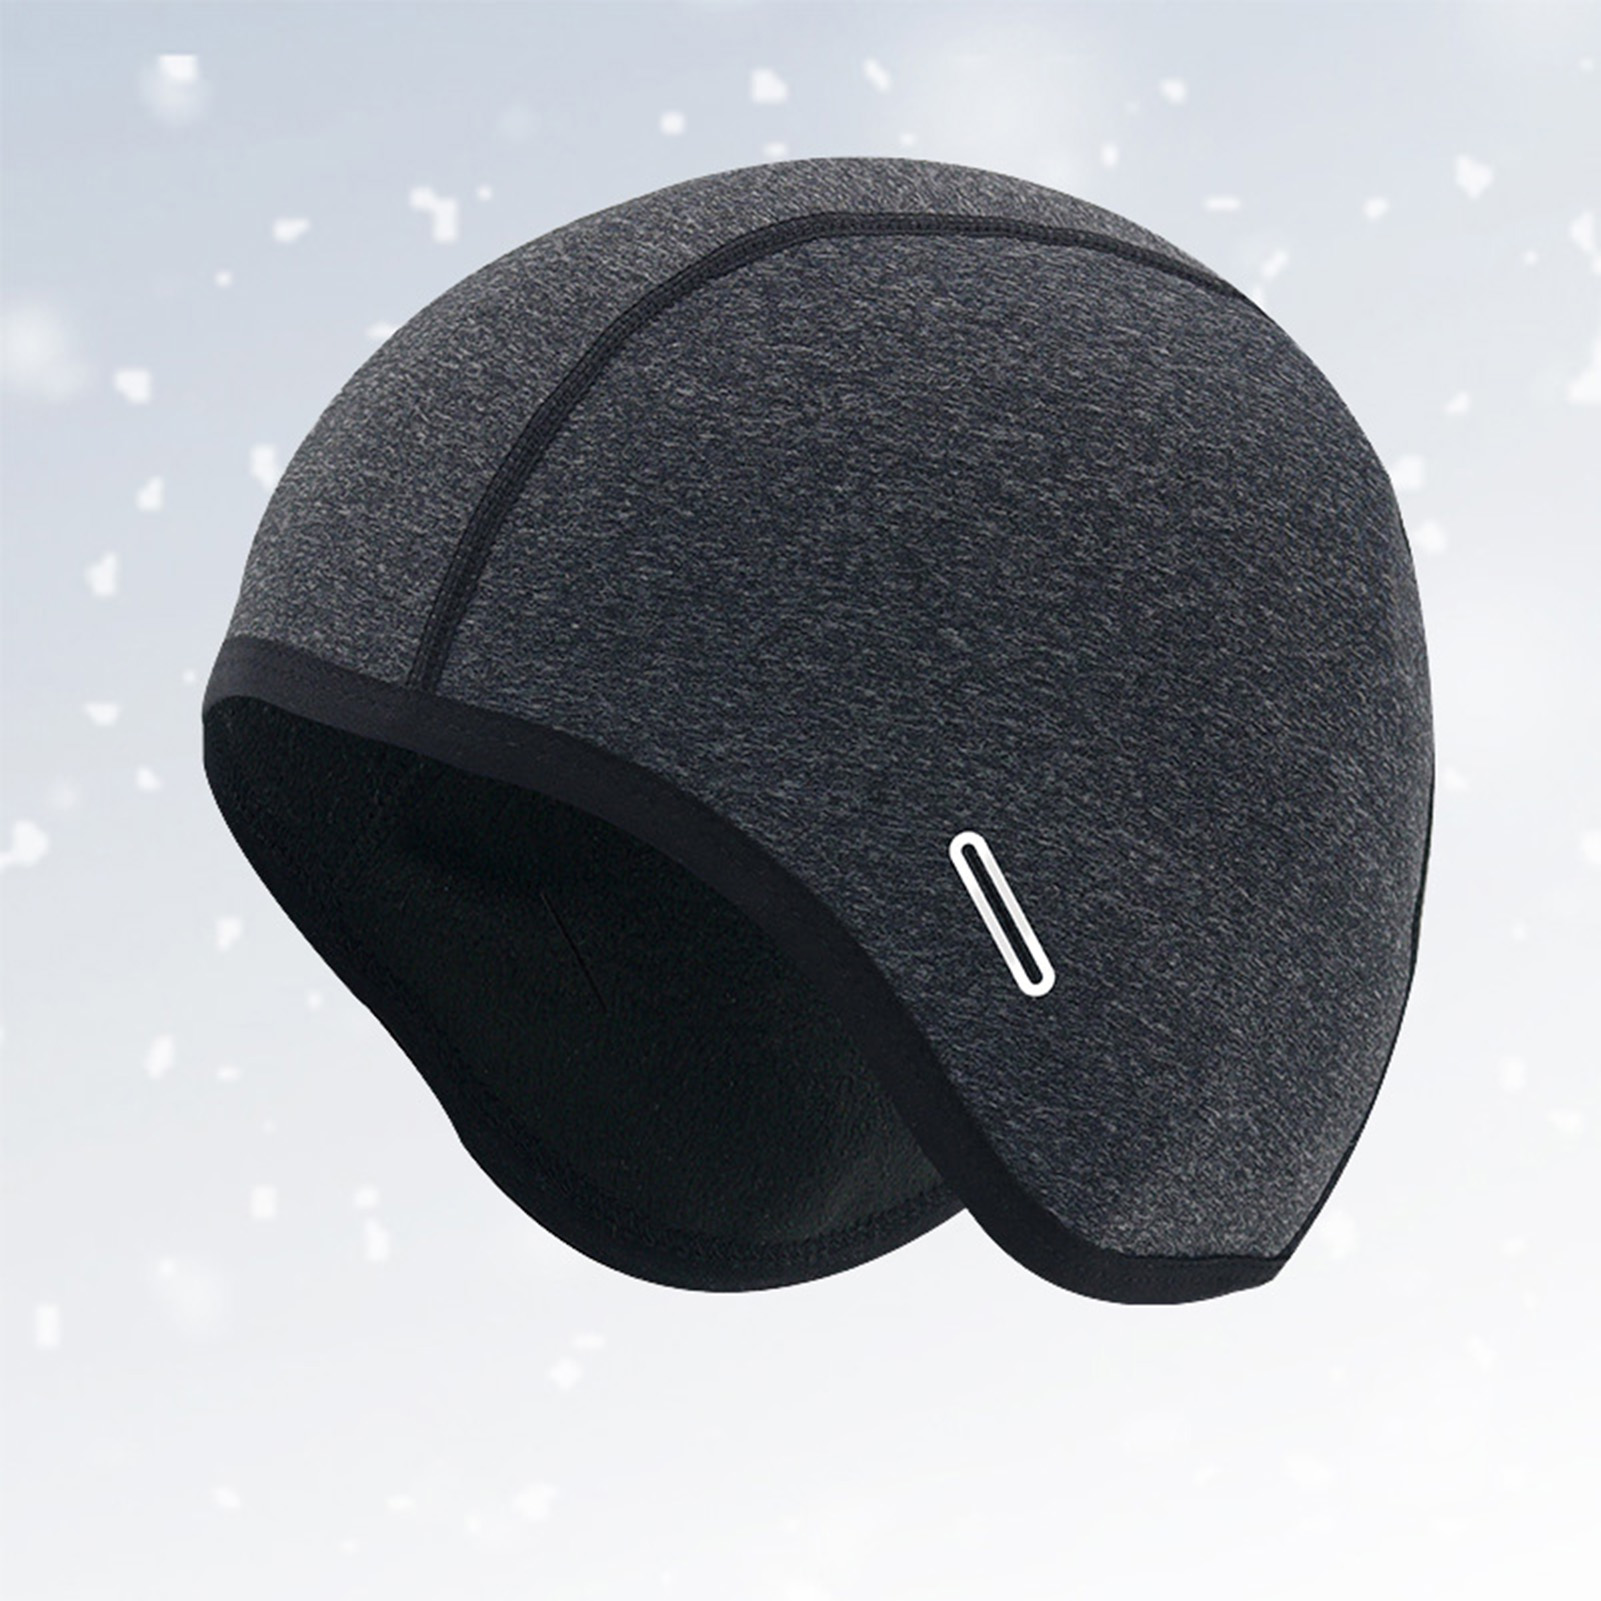 Details about  / Outdoor Cycling Hat Windproof Thermal Skull Cap Warm Running Helmet Liner Gift